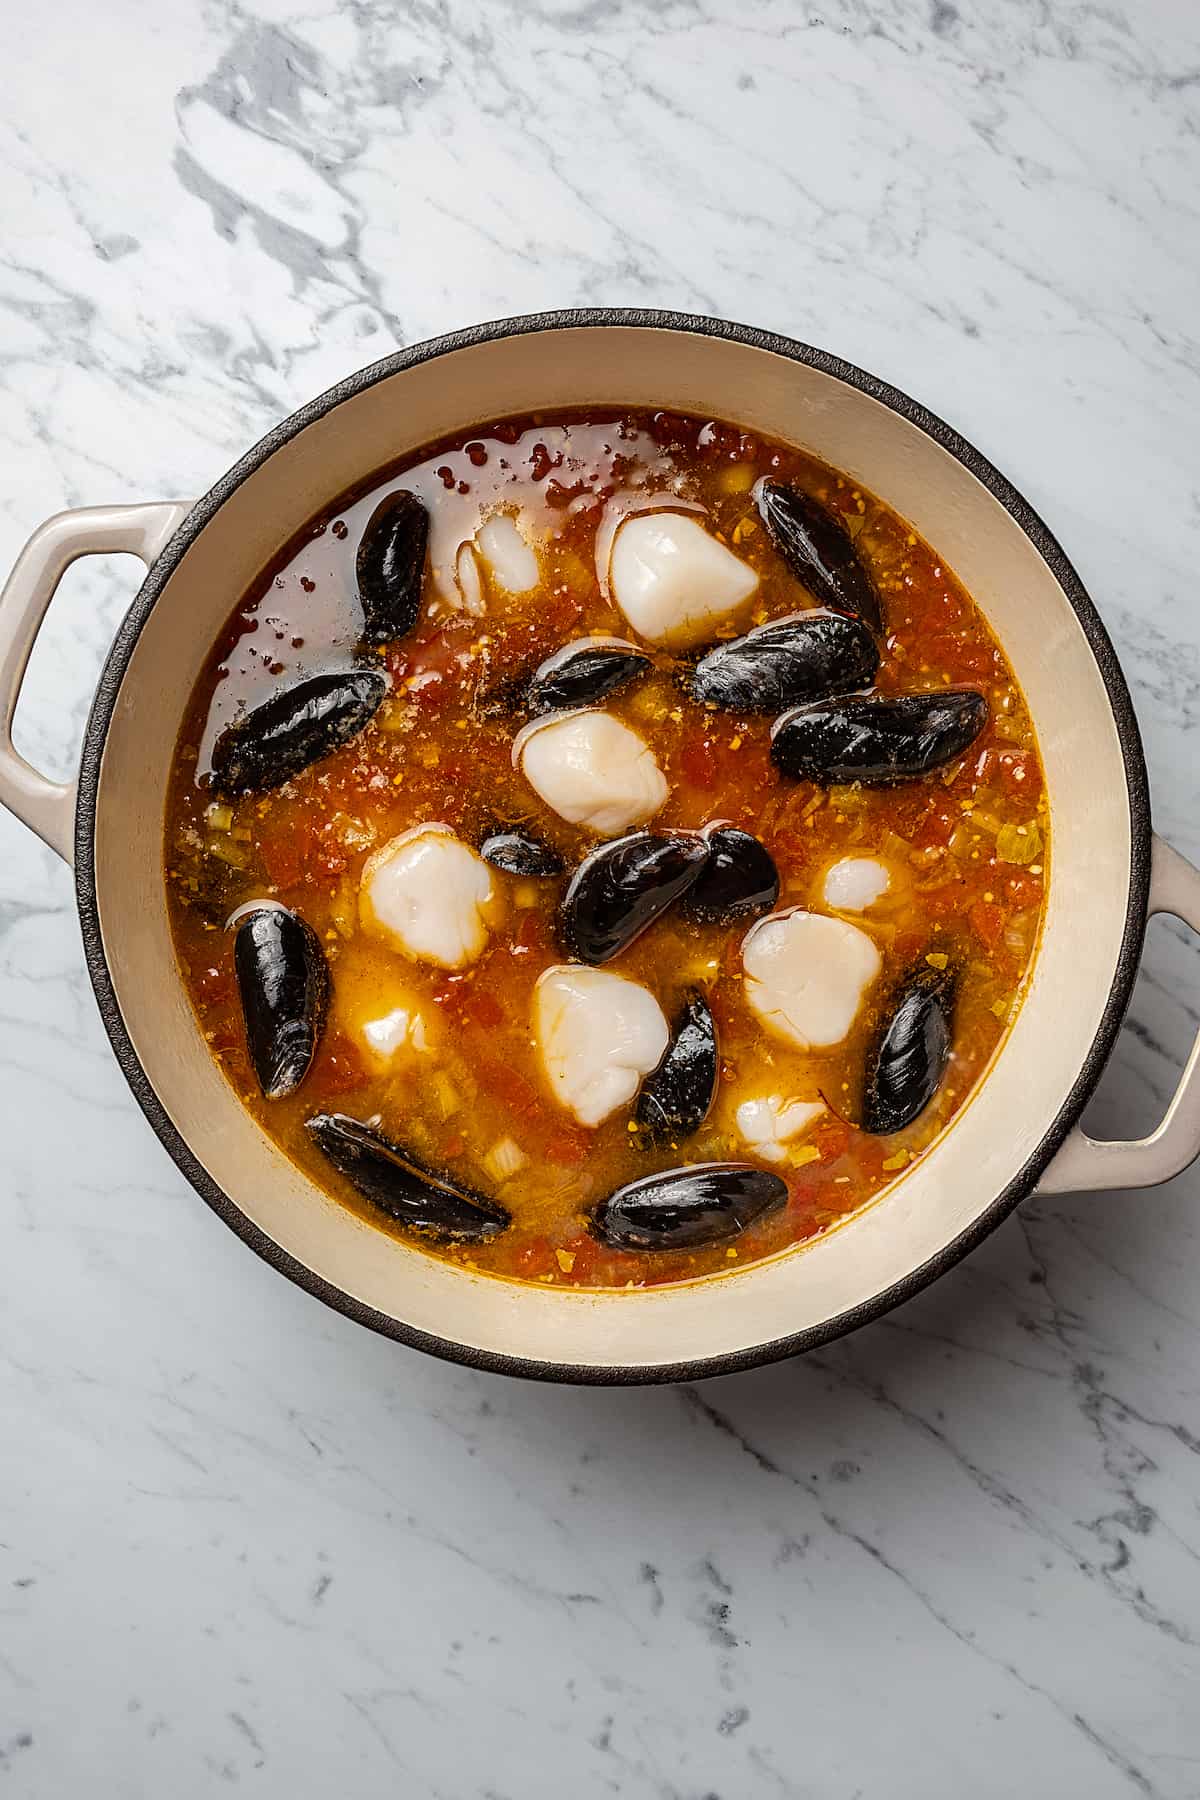 Fish and mussels arranged in a Dutch oven full of cooking soup.